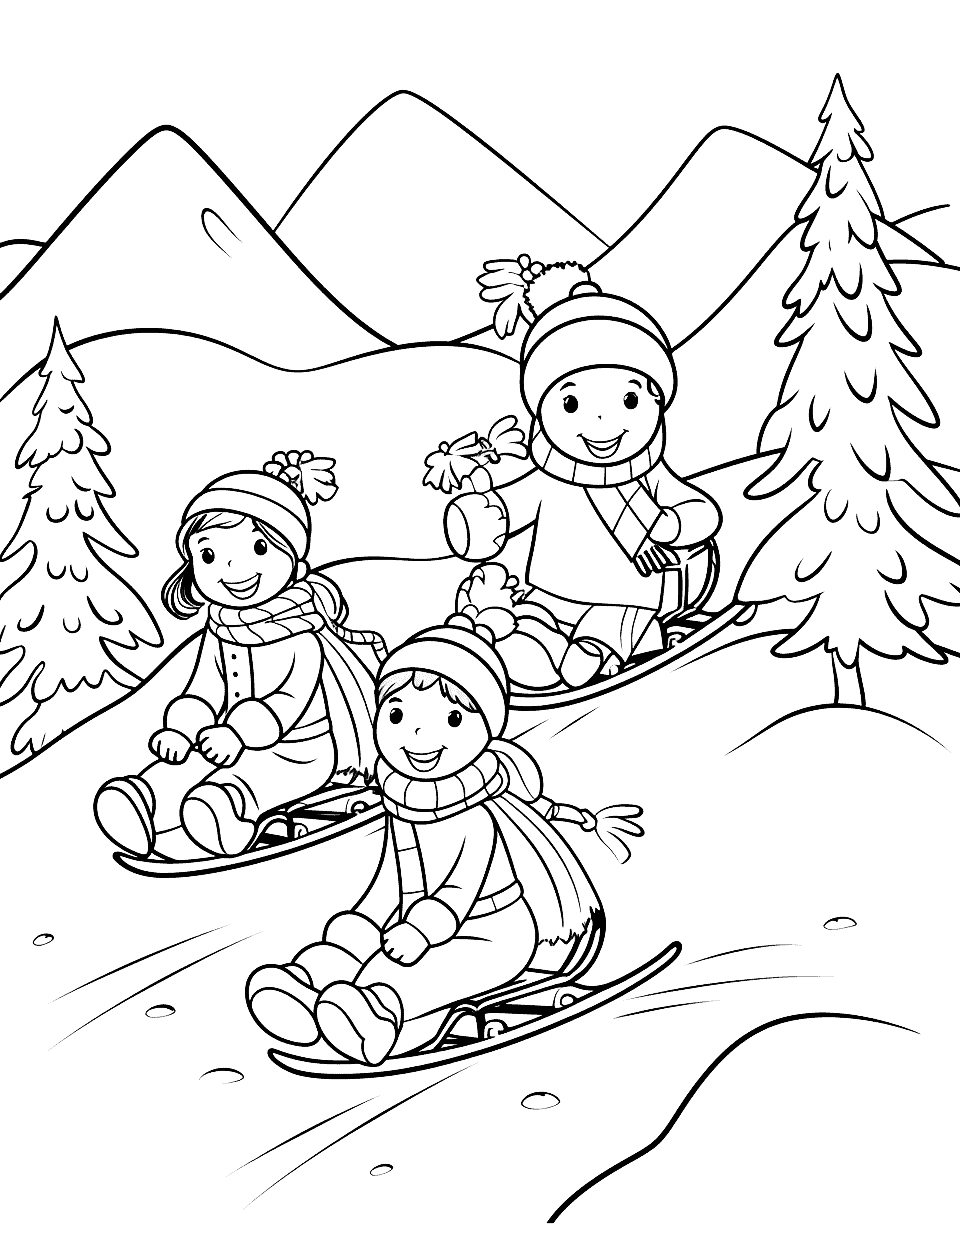 Sledding with Friends Christmas Coloring Page - Kids having fun sledding down a hill with their friends.